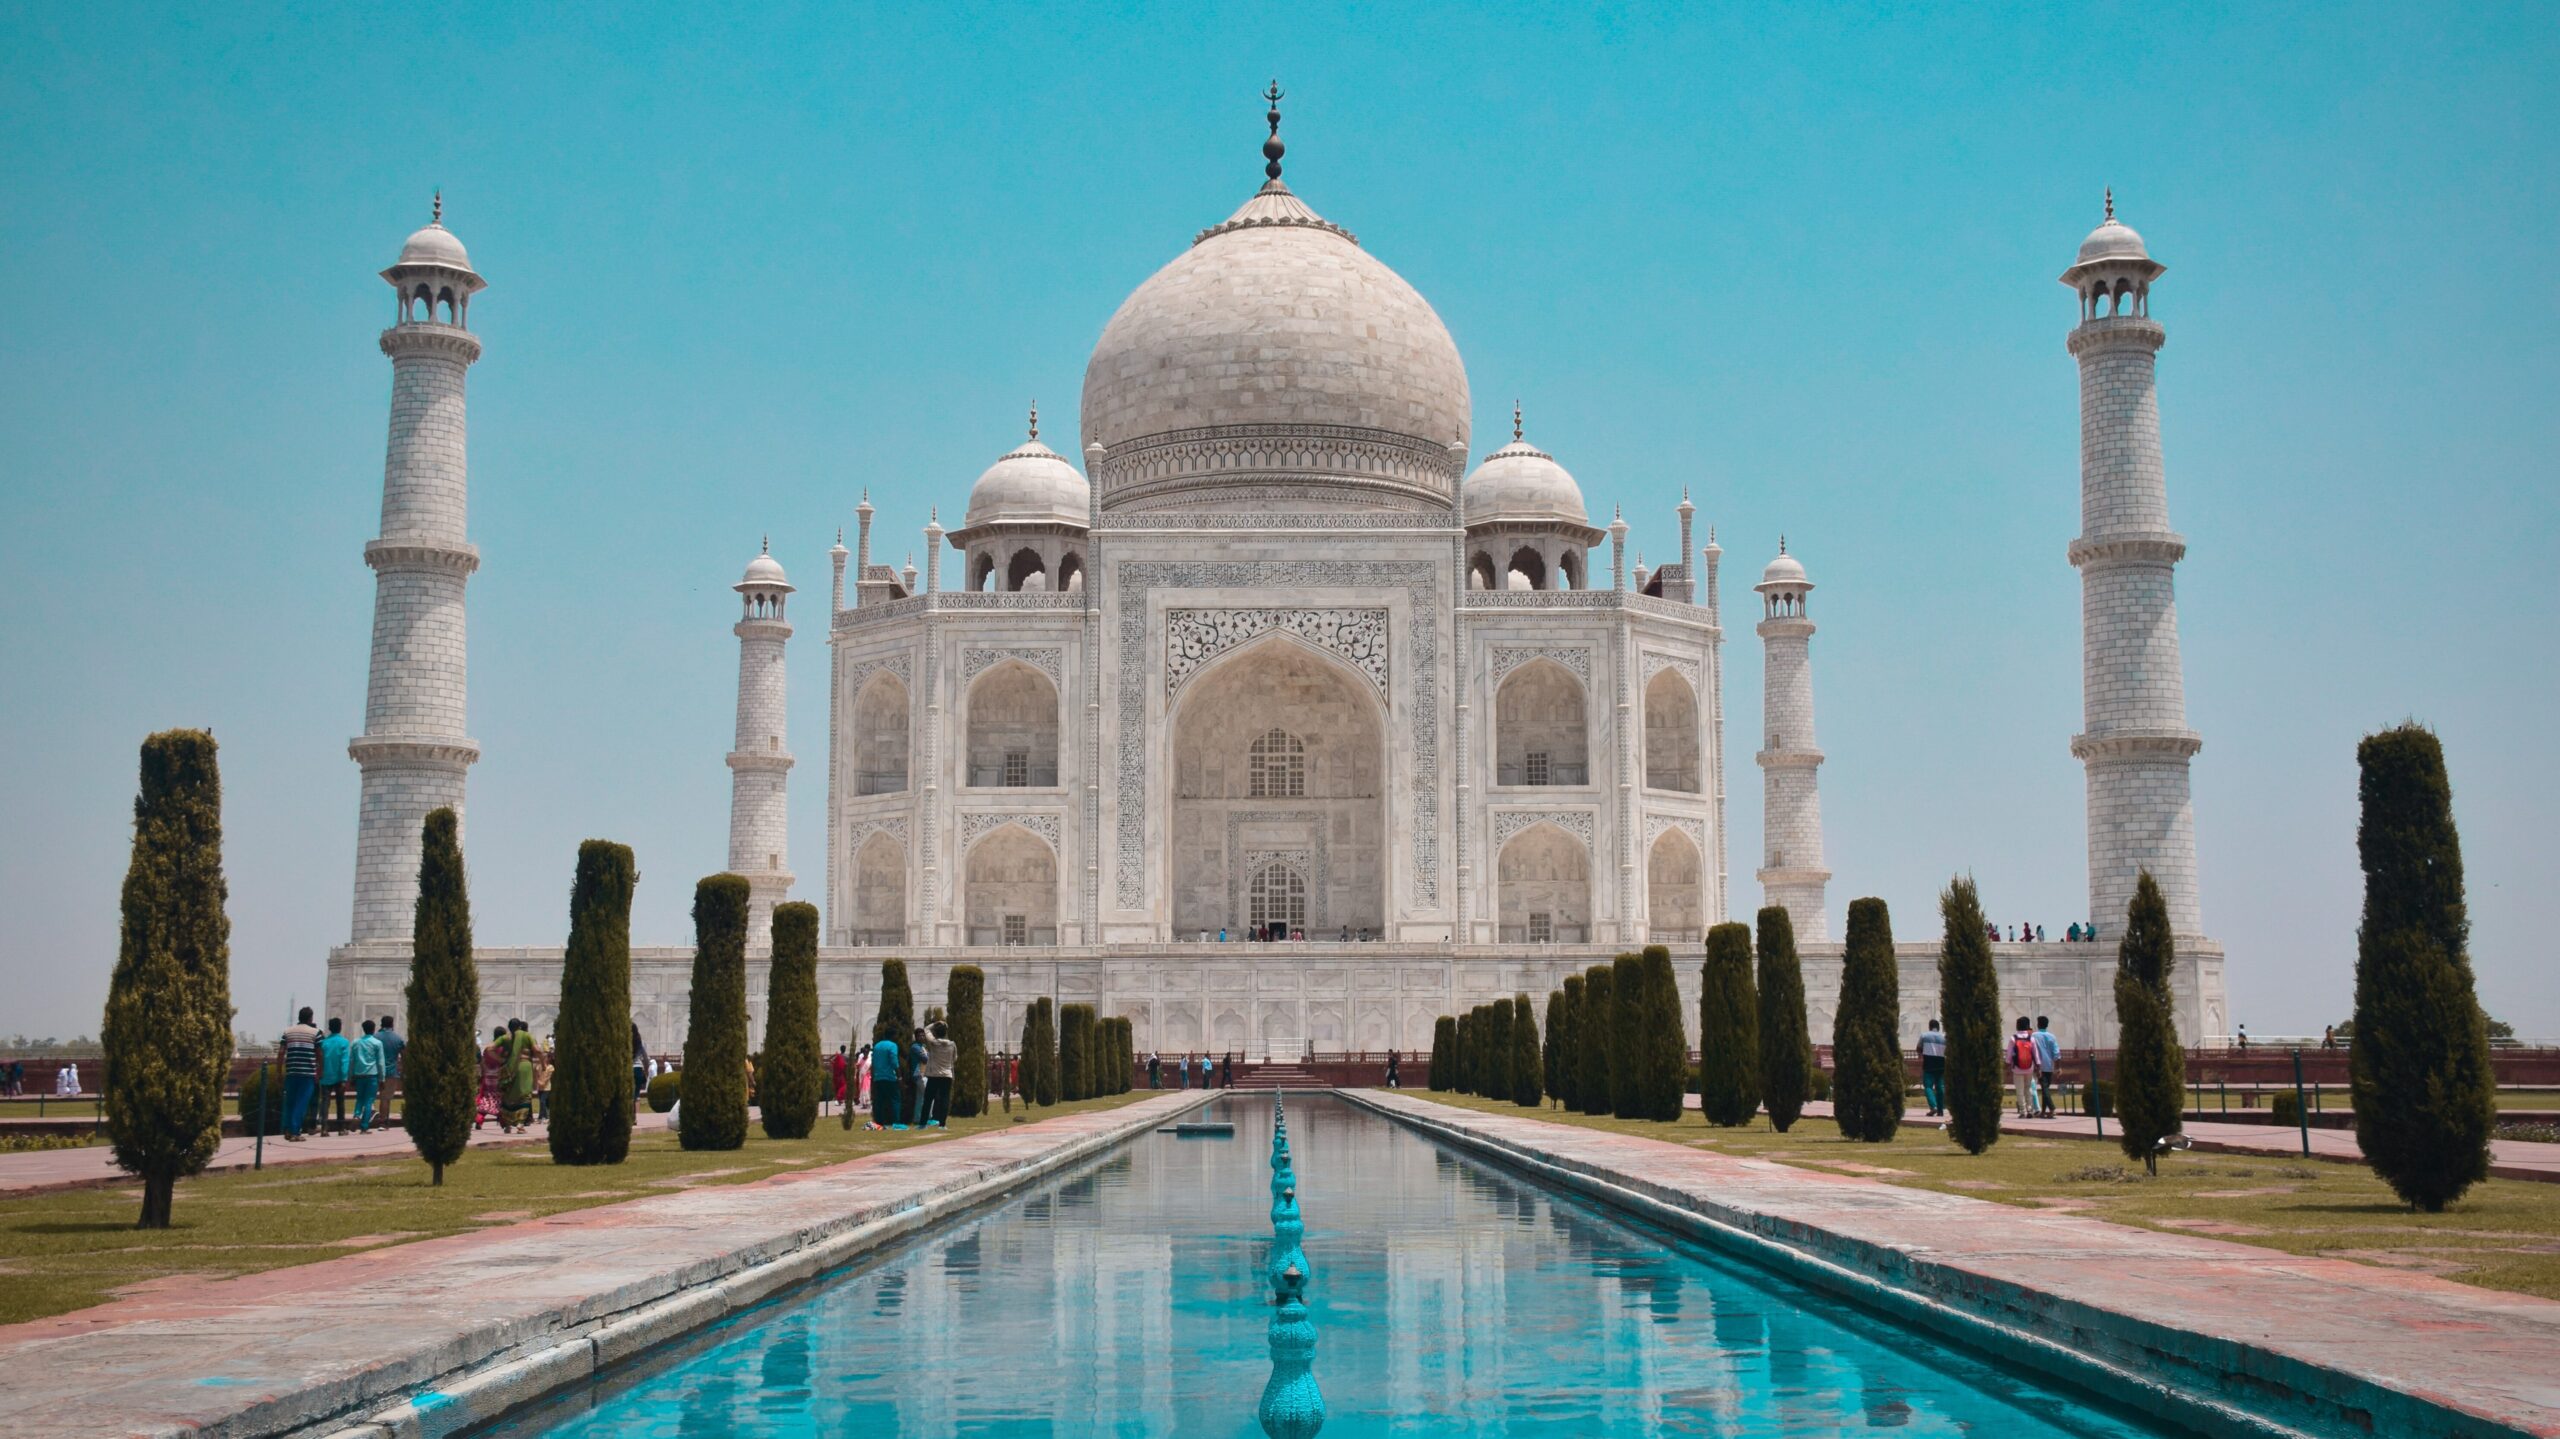 World heritage site Taj Mahal makes Agra one of the most beautiful places in India.